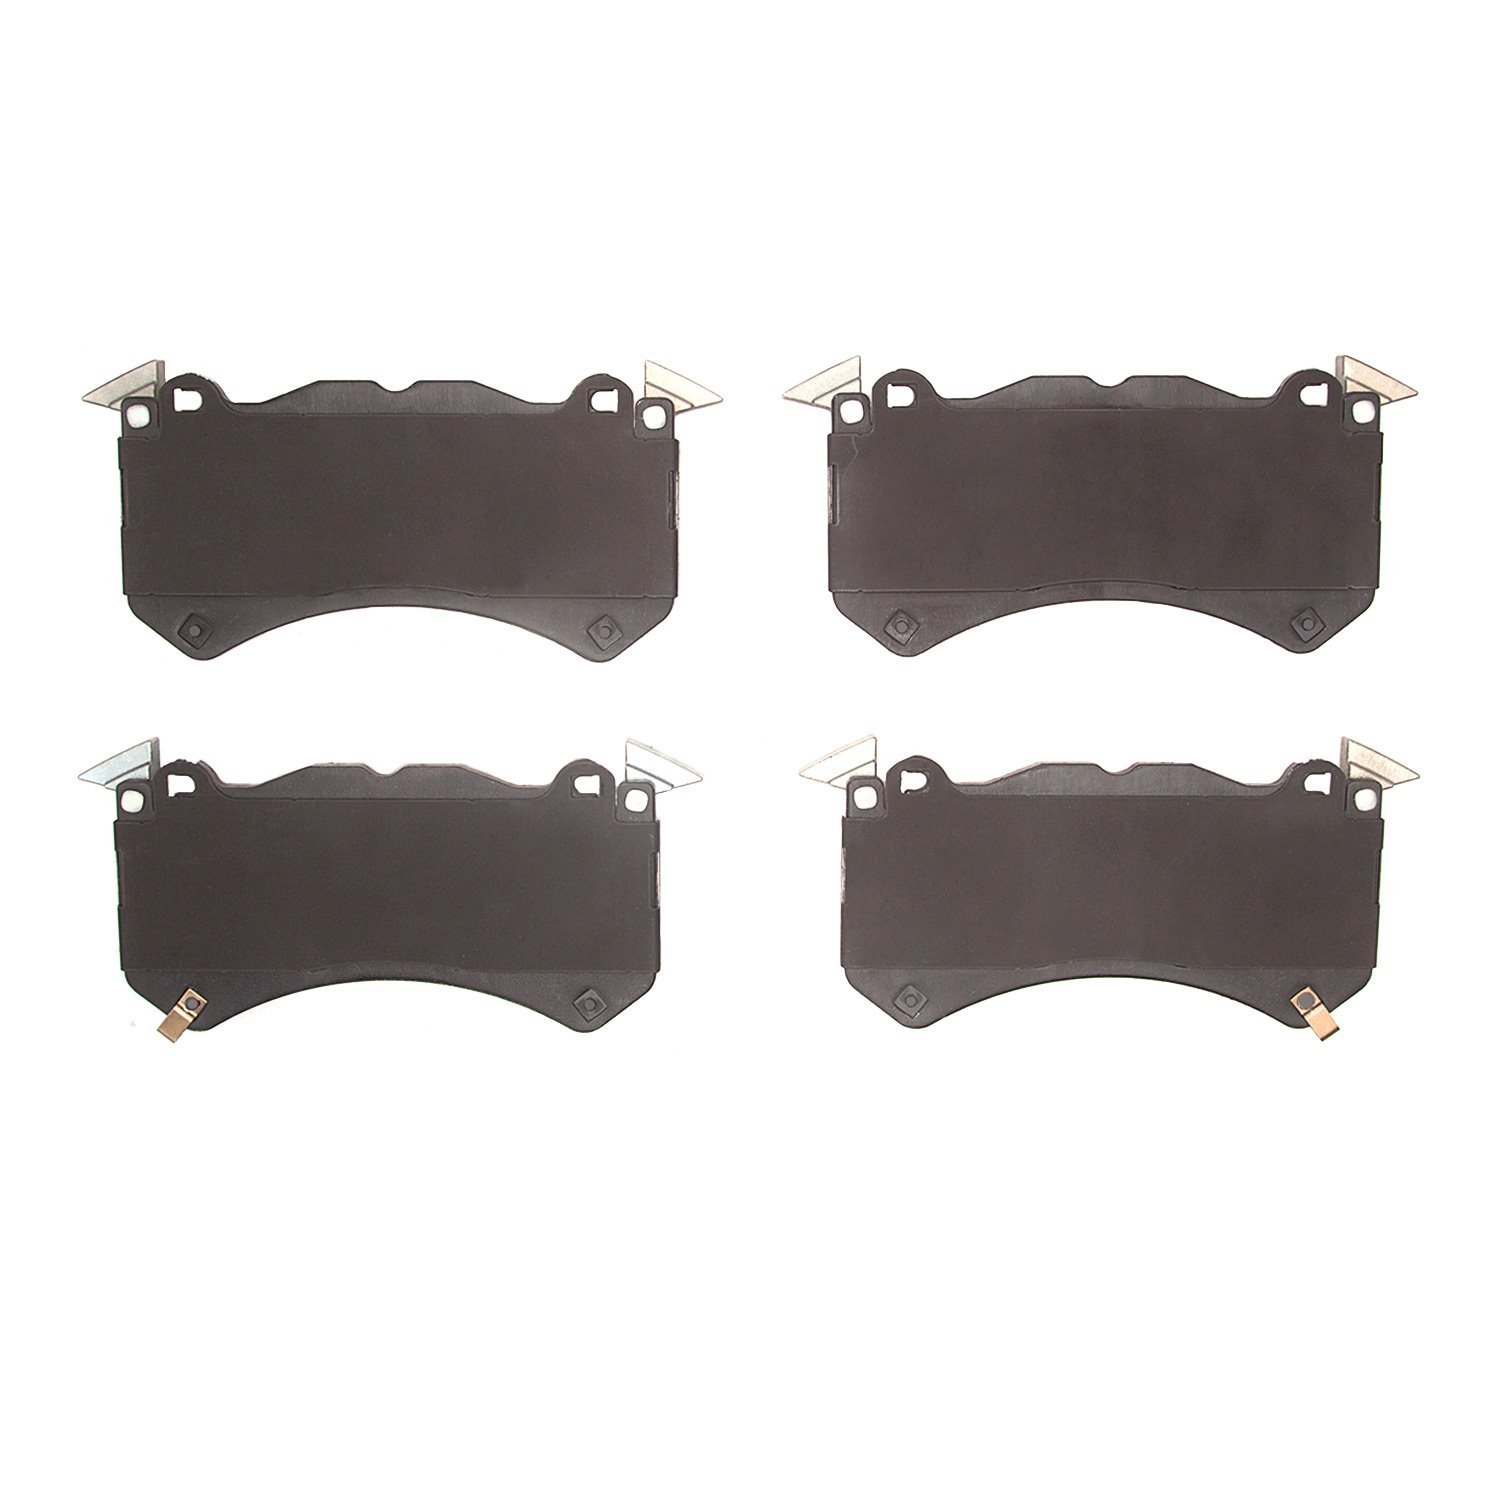 1551-2253-00 5000 Advanced Low-Metallic Brake Pads, Fits Select Acura/Honda, Position: Front